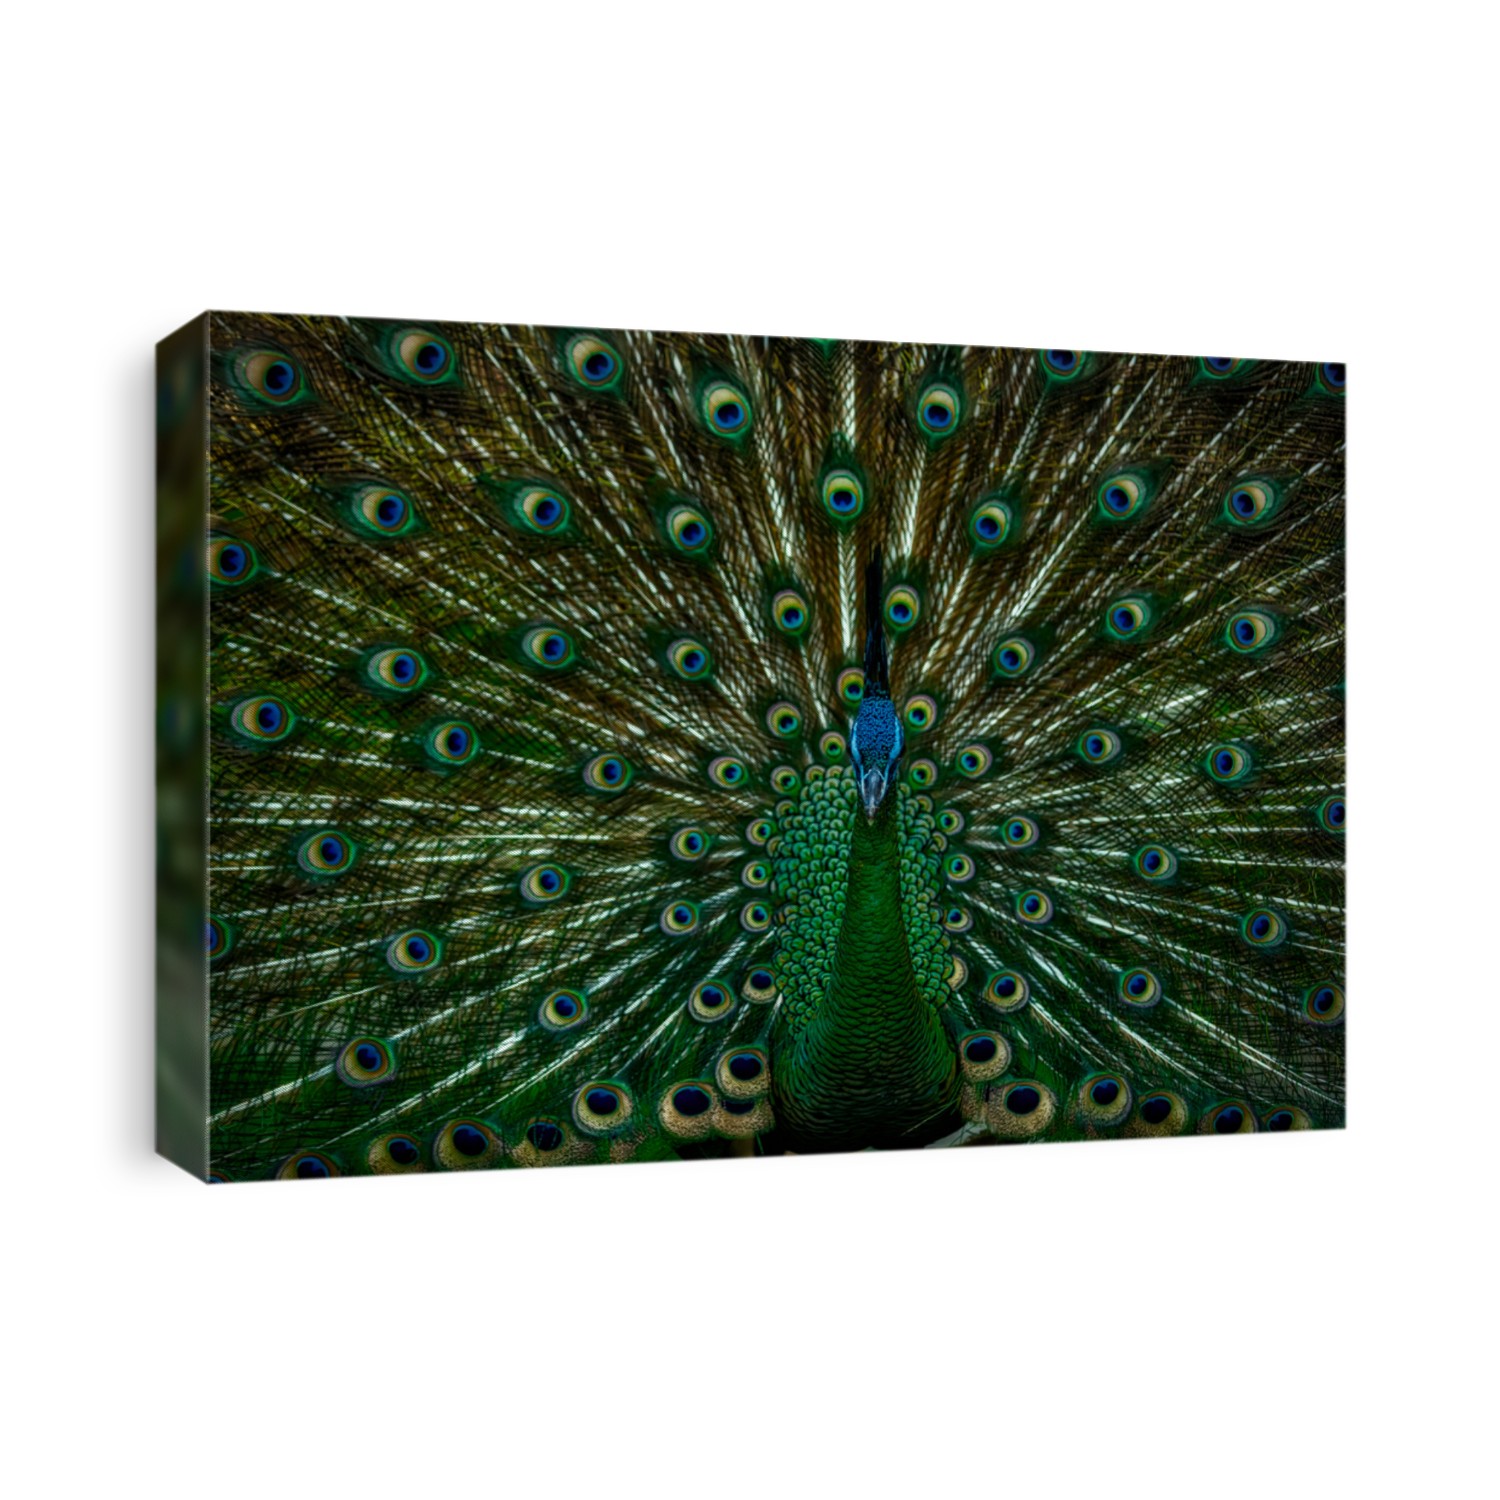 Portrait of beautiful peacock with feathers out
